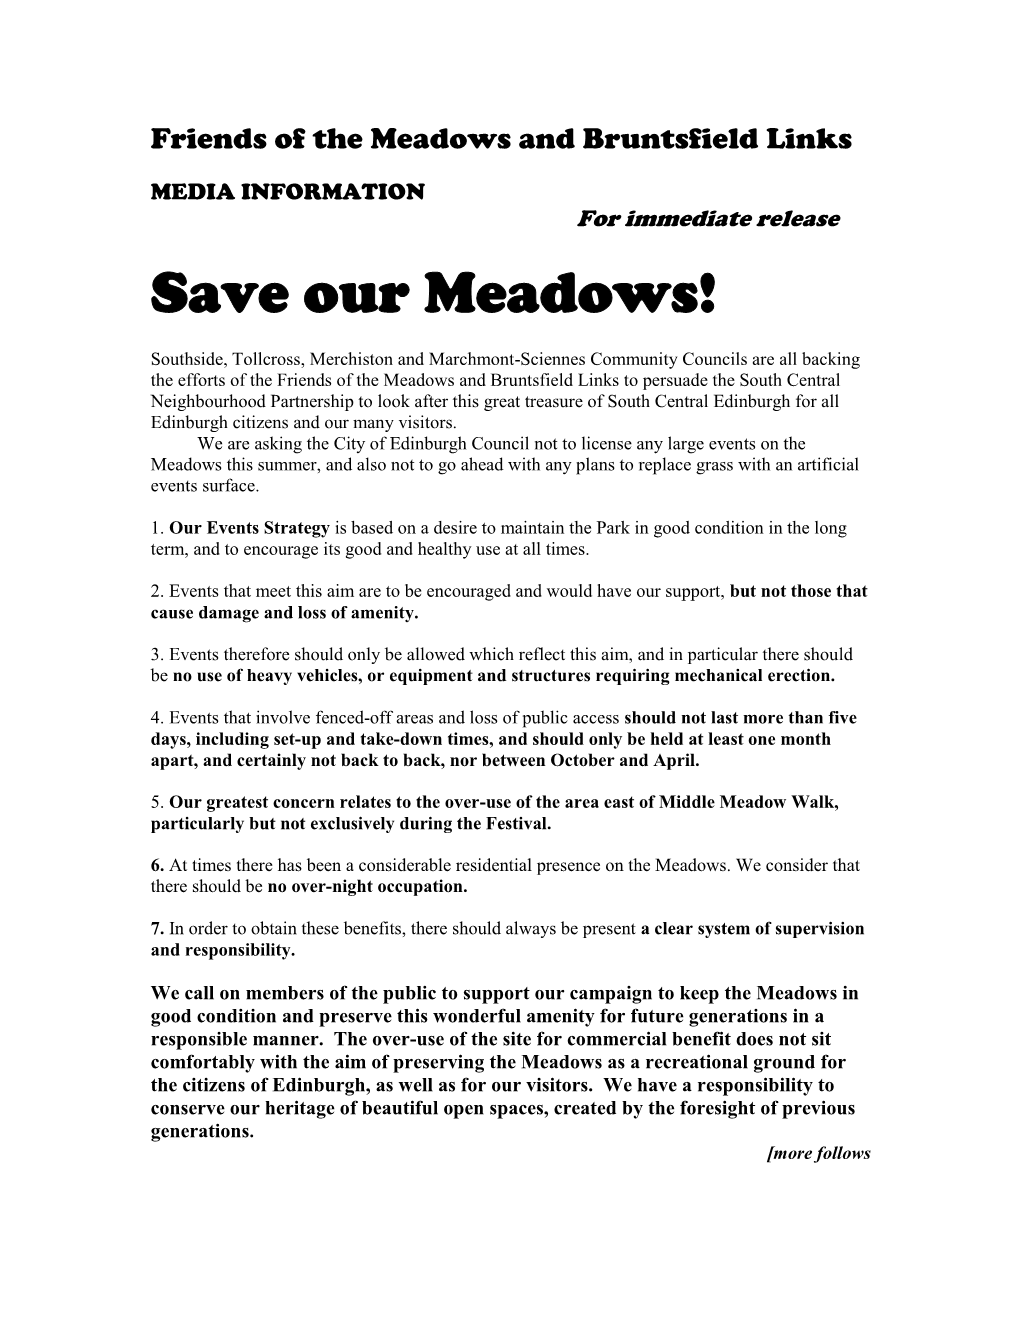 Save Our Meadows!